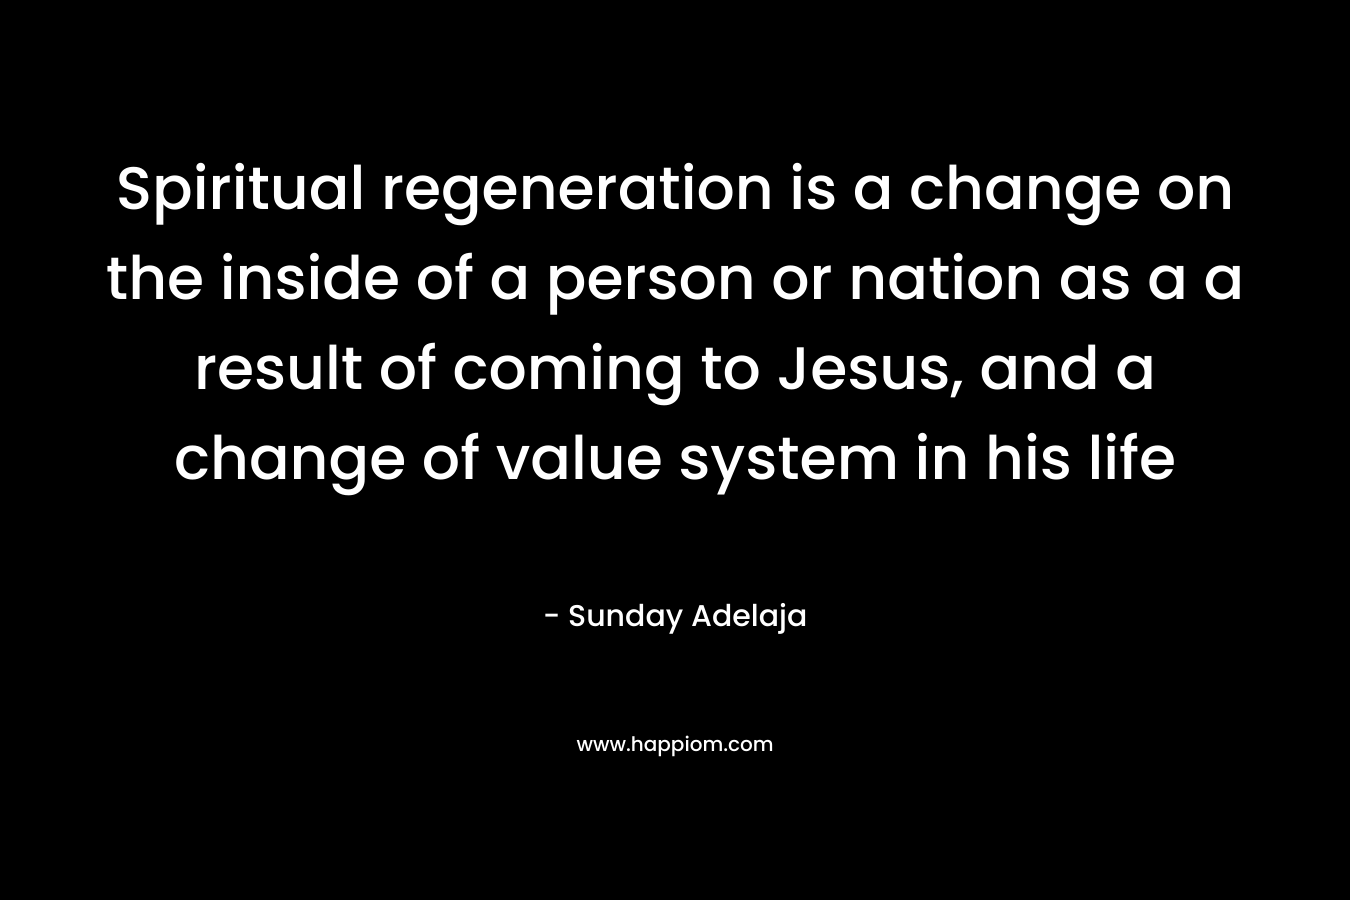 Spiritual regeneration is a change on the inside of a person or nation as a a result of coming to Jesus, and a change of value system in his life